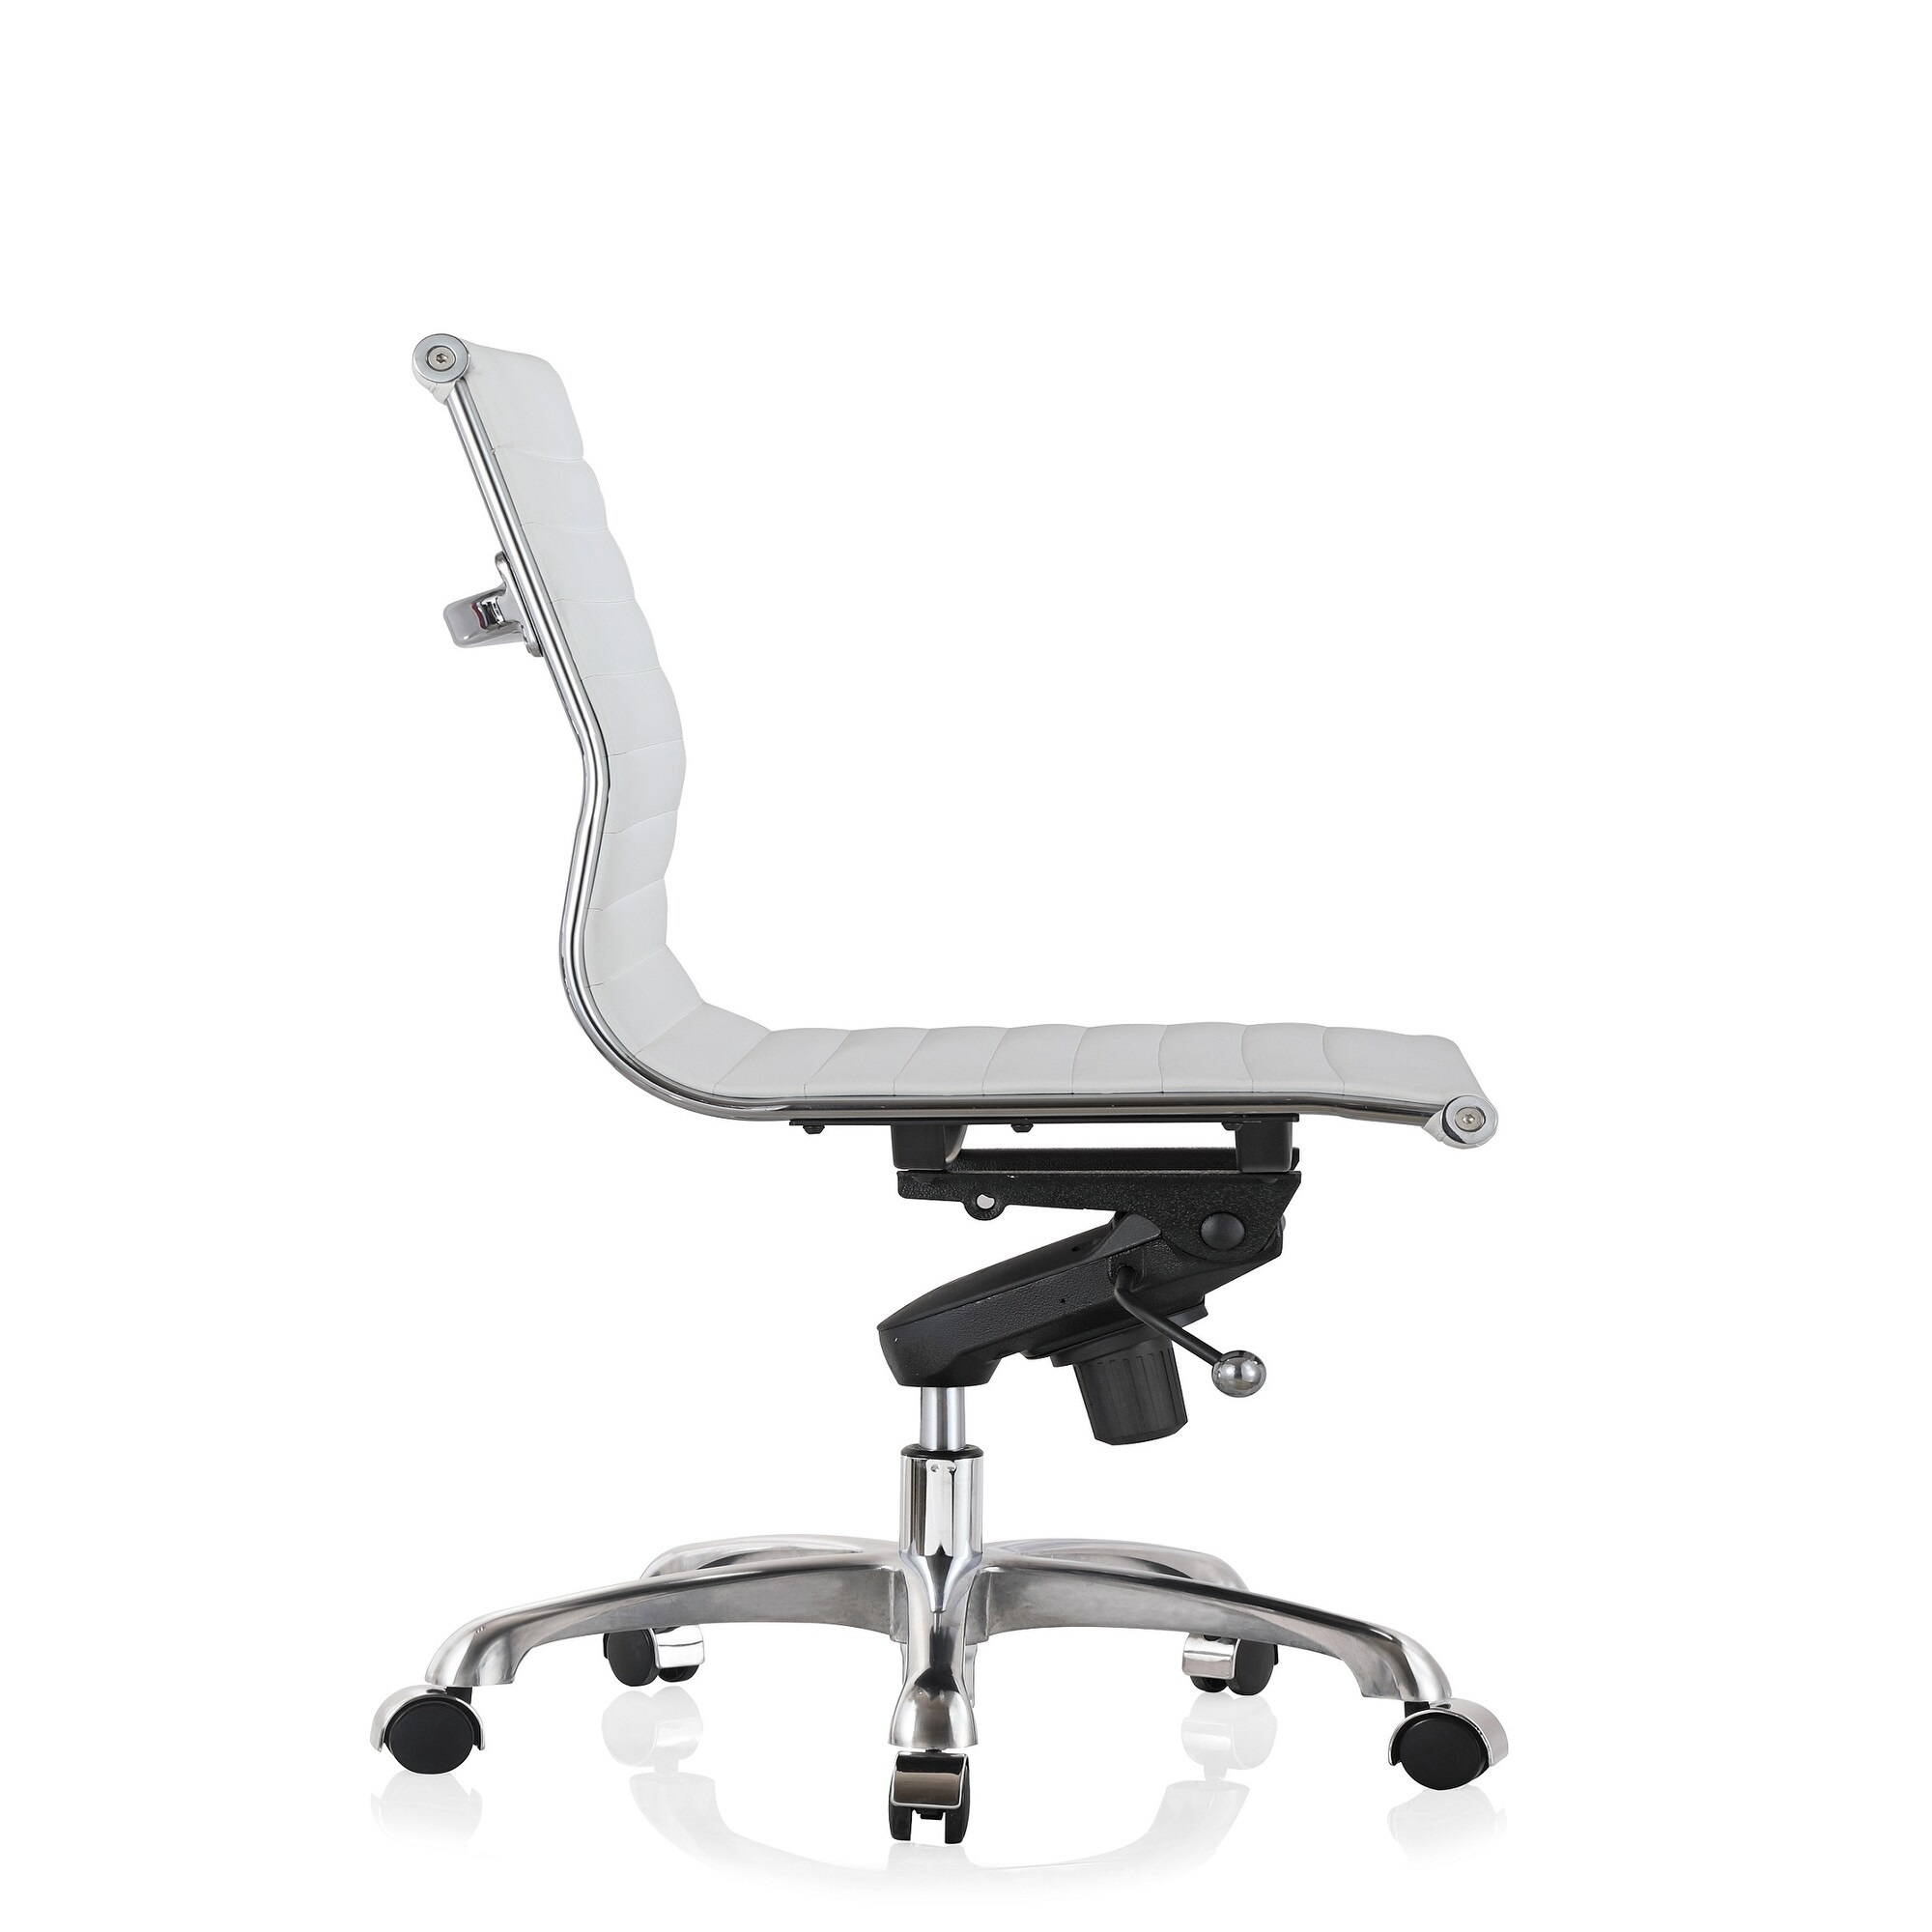 Oxie Low-back office chair with without Arm in White